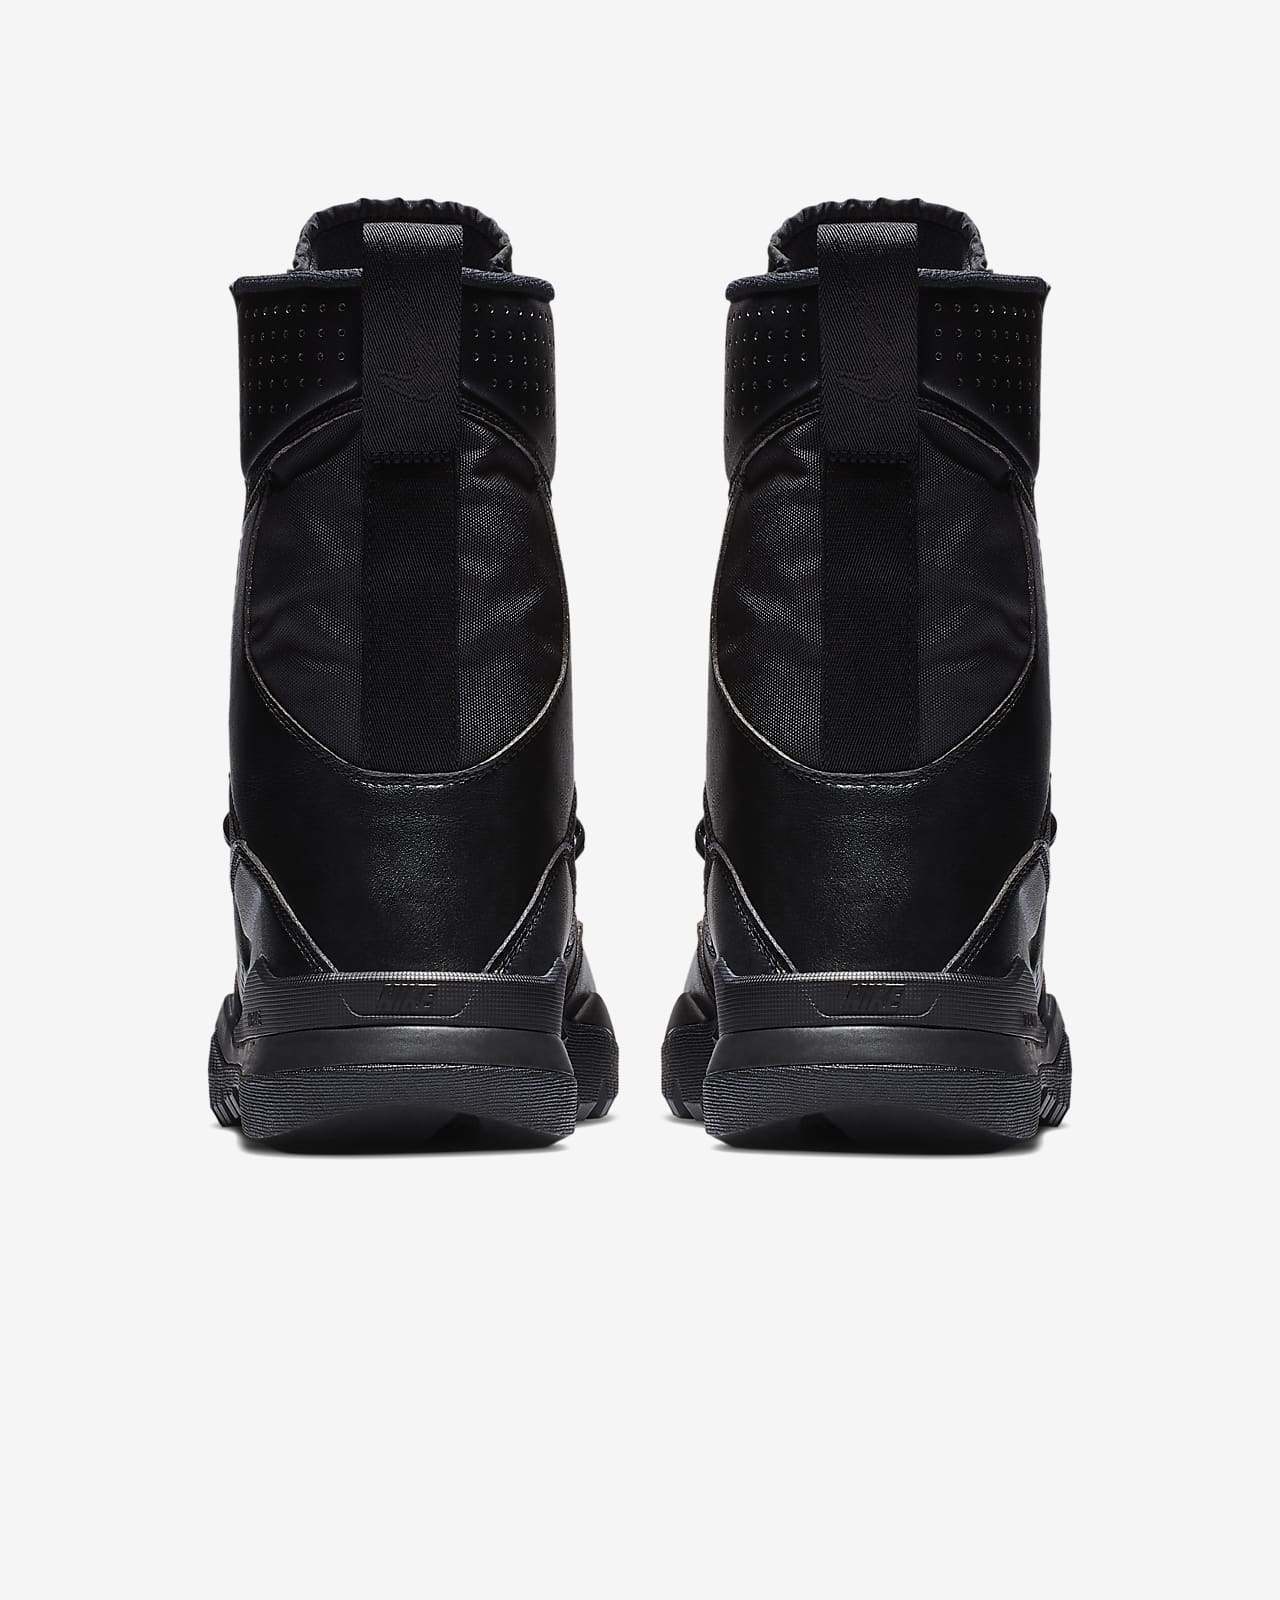 SFB 2 (approx.) Tactical Boot. Nike